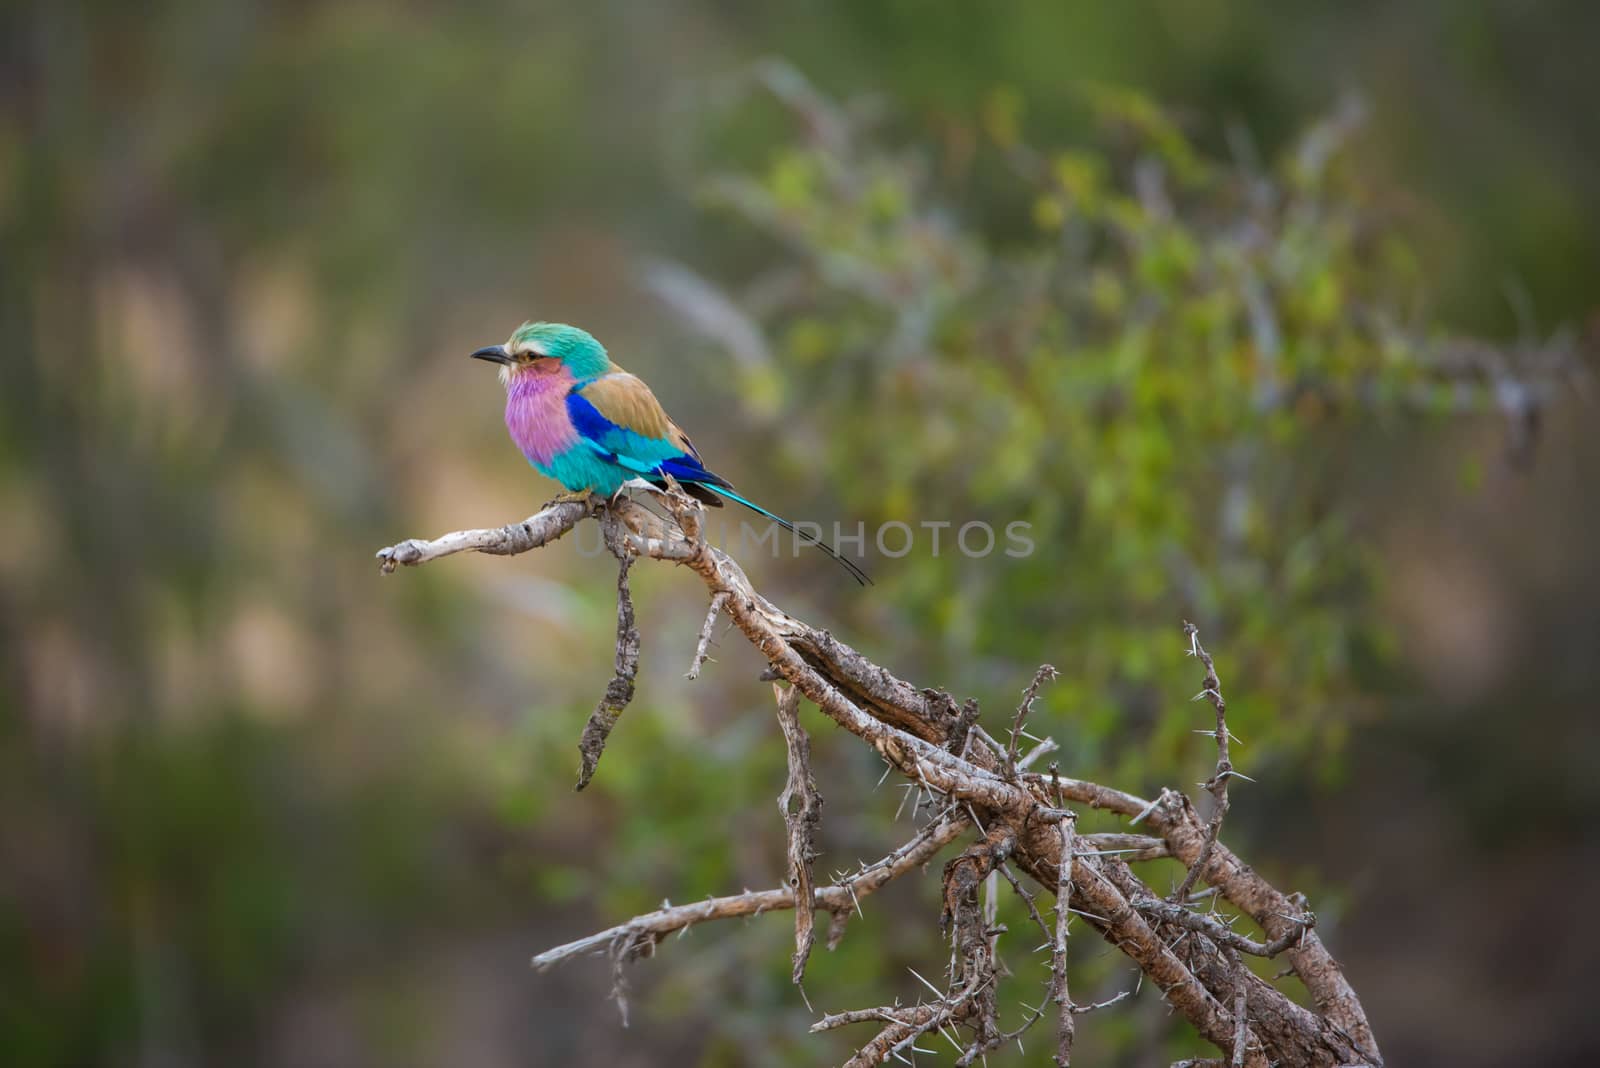 Lilac-Beasted Roller pirched on a thorny branch